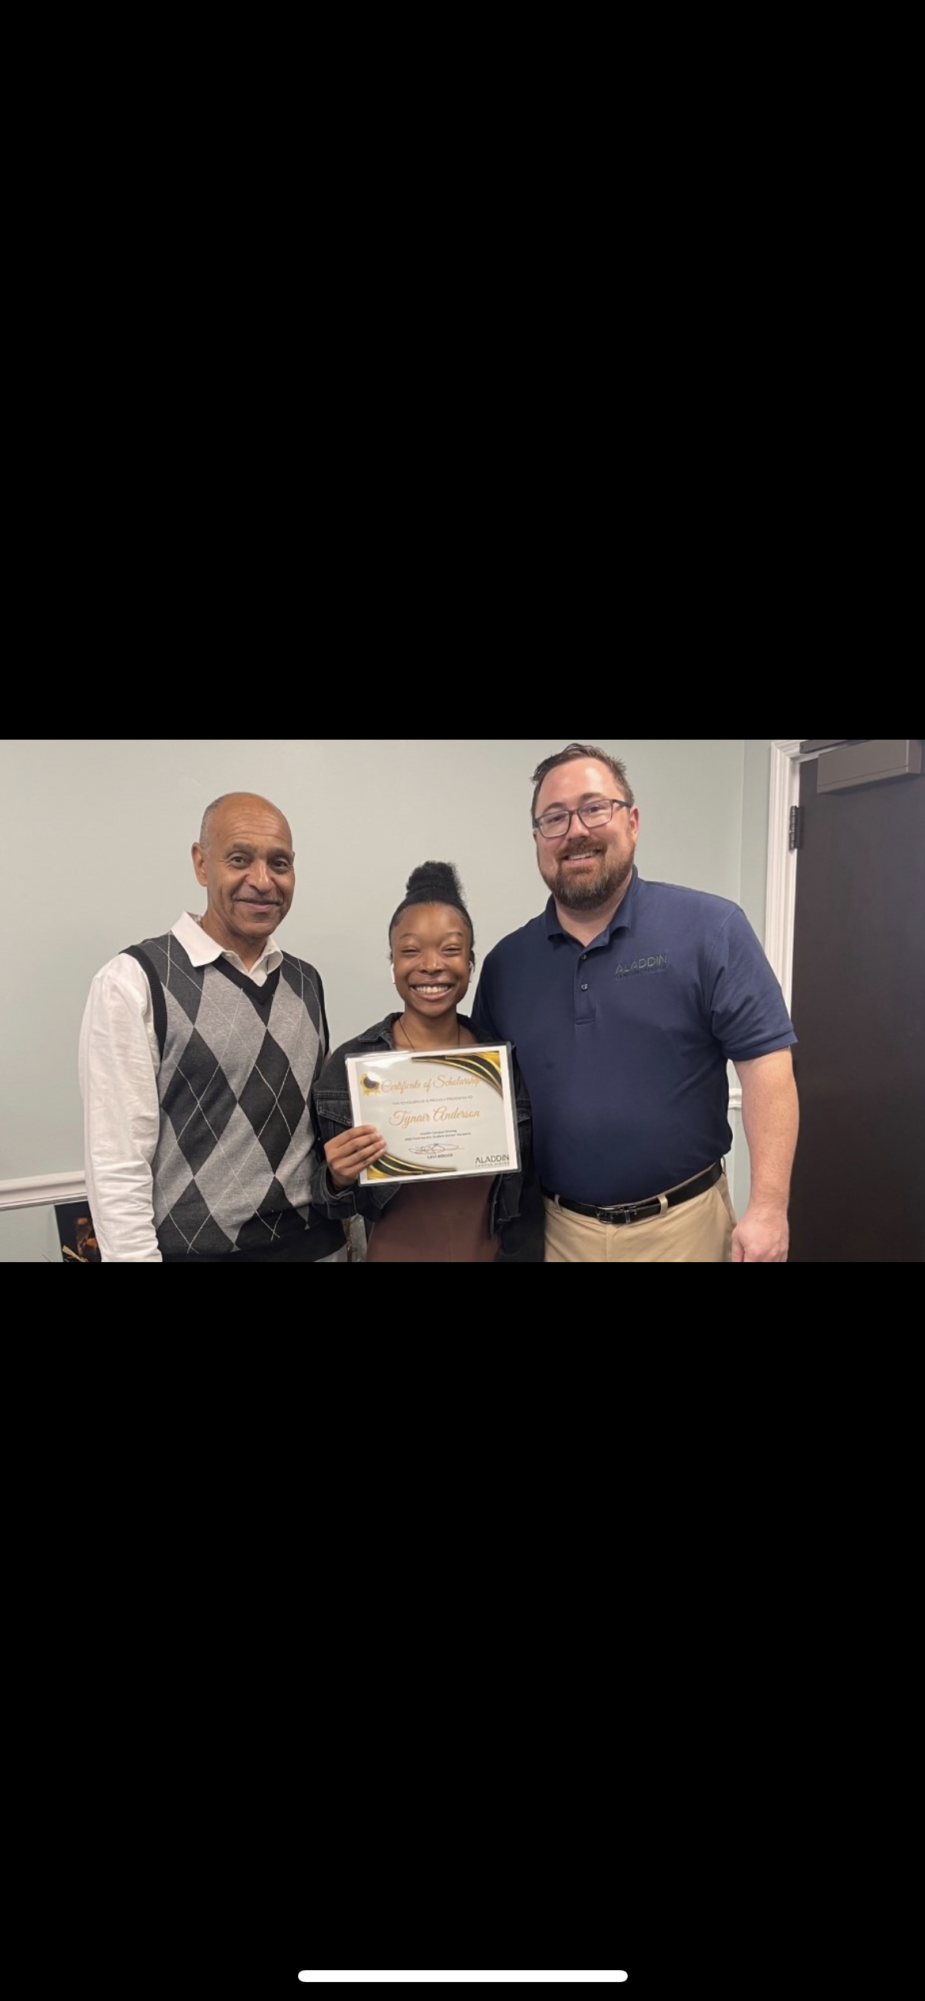 Tynair Anderson receives her Aladdin Food Services scholarship last year with Michael Ferguson (left), and Levi Briggs (right).